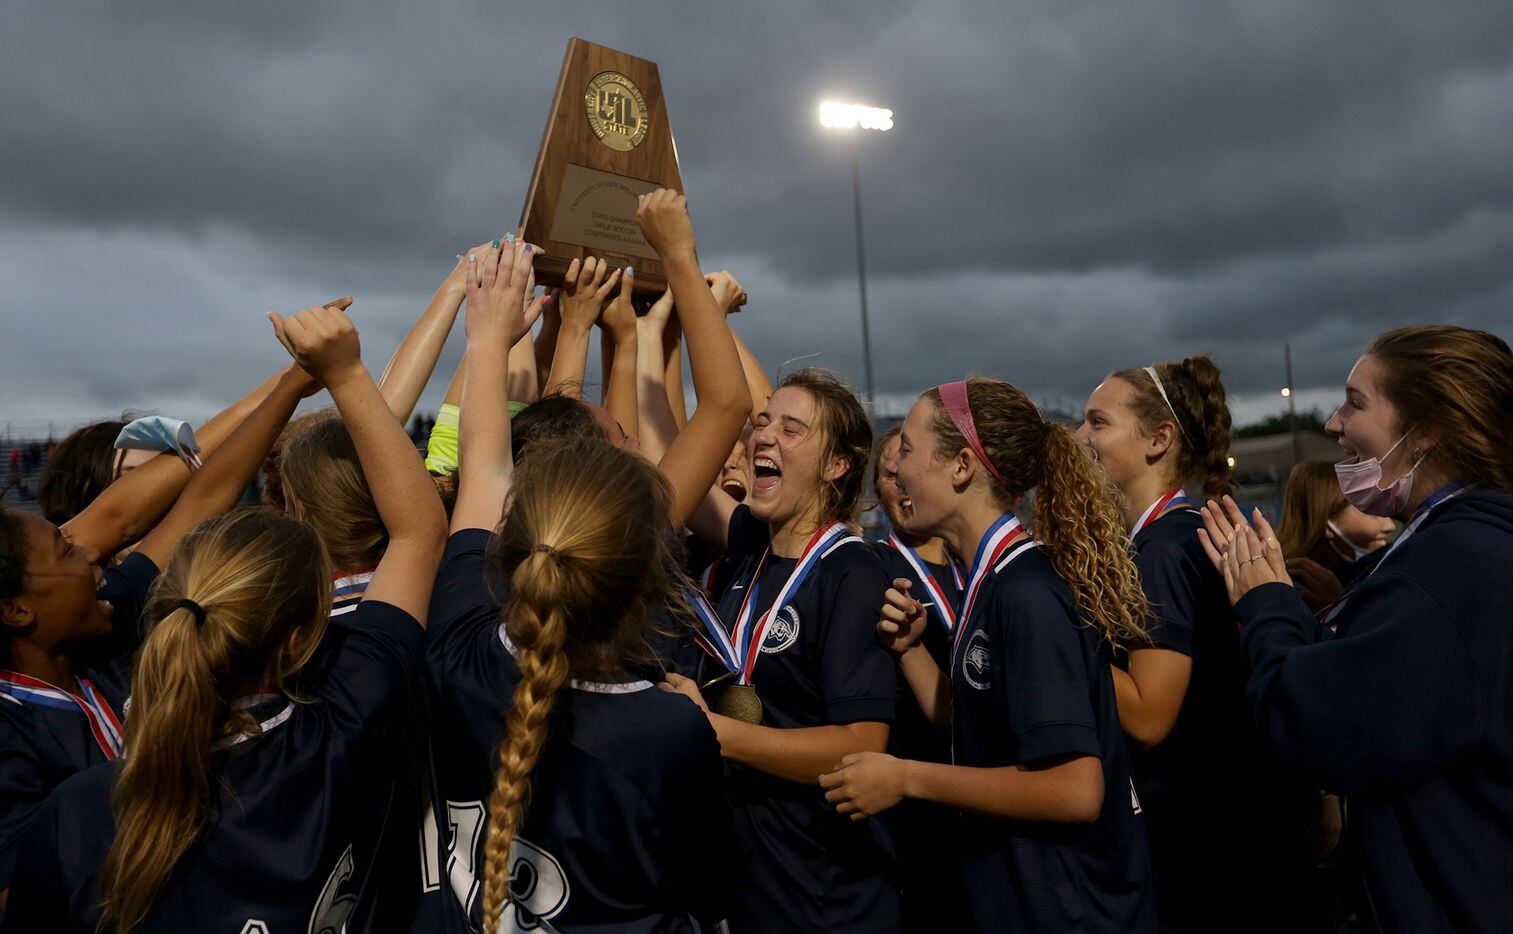 Lewisville Flower Mound players celebrate with the trophy after their UIL 6A girls State championship soccer game against Austin Vandegrift at Birkelbach Field on April 16, 2021 in Georgetown, Texas. Lewisville Flower Mound won 2-1. (Thao Nguyen/Special Contributor)